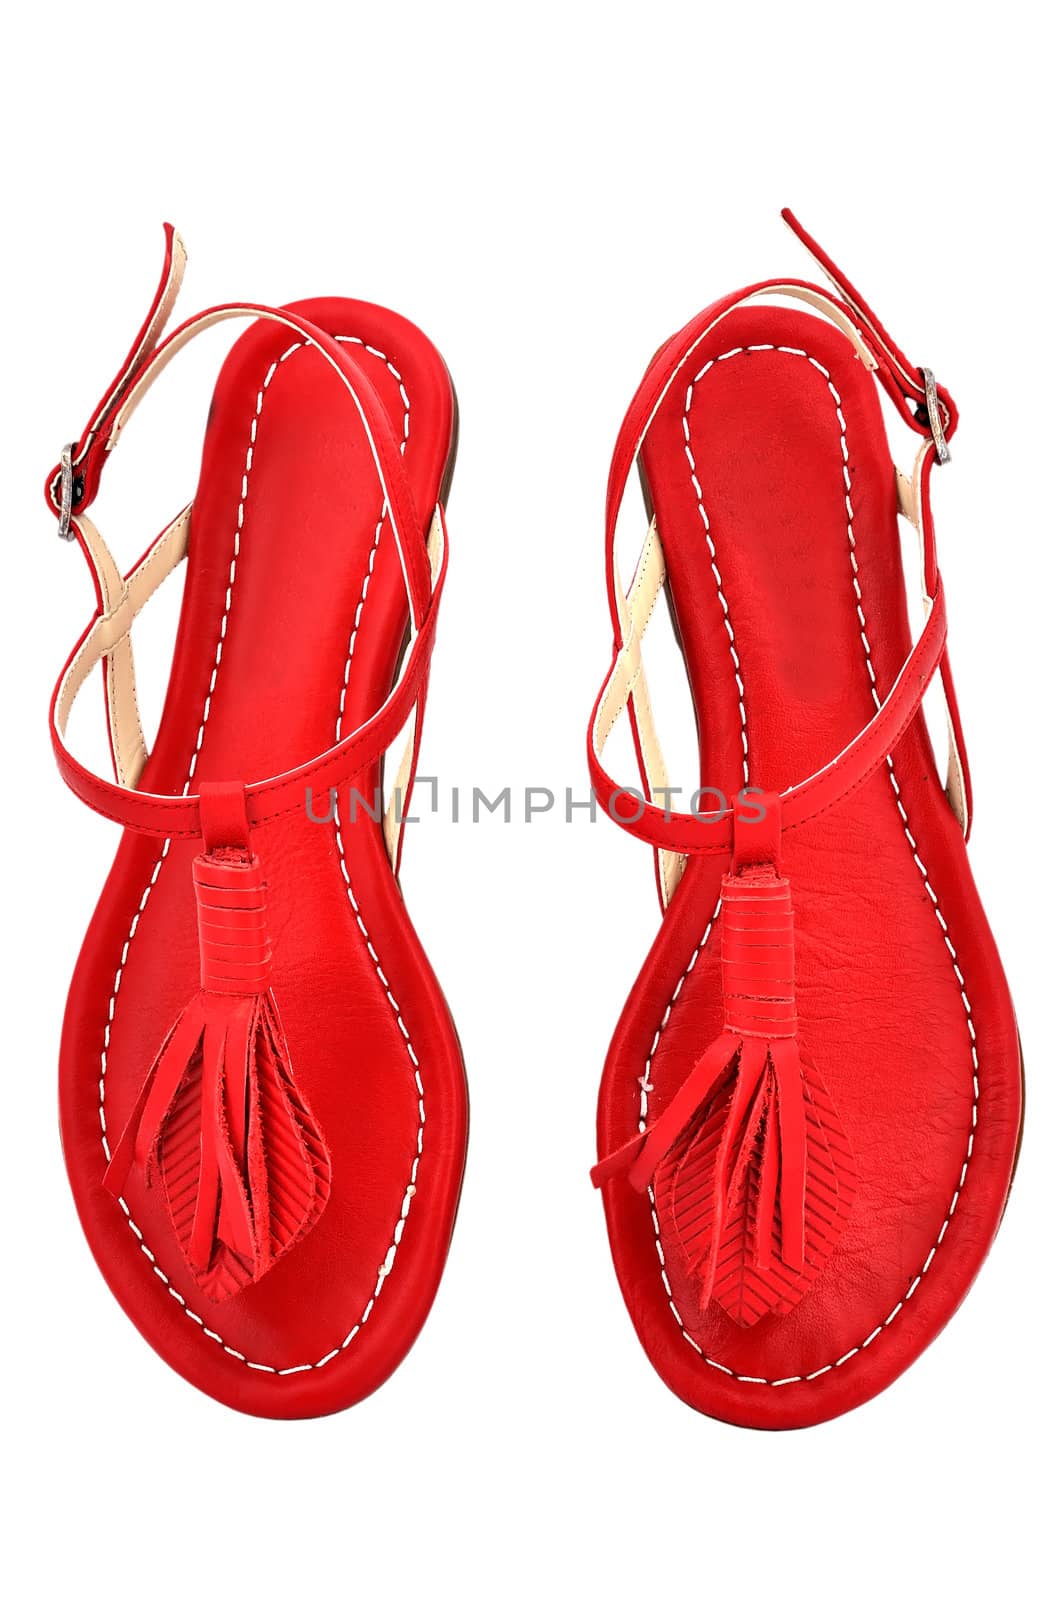 women's red sandals, view from top